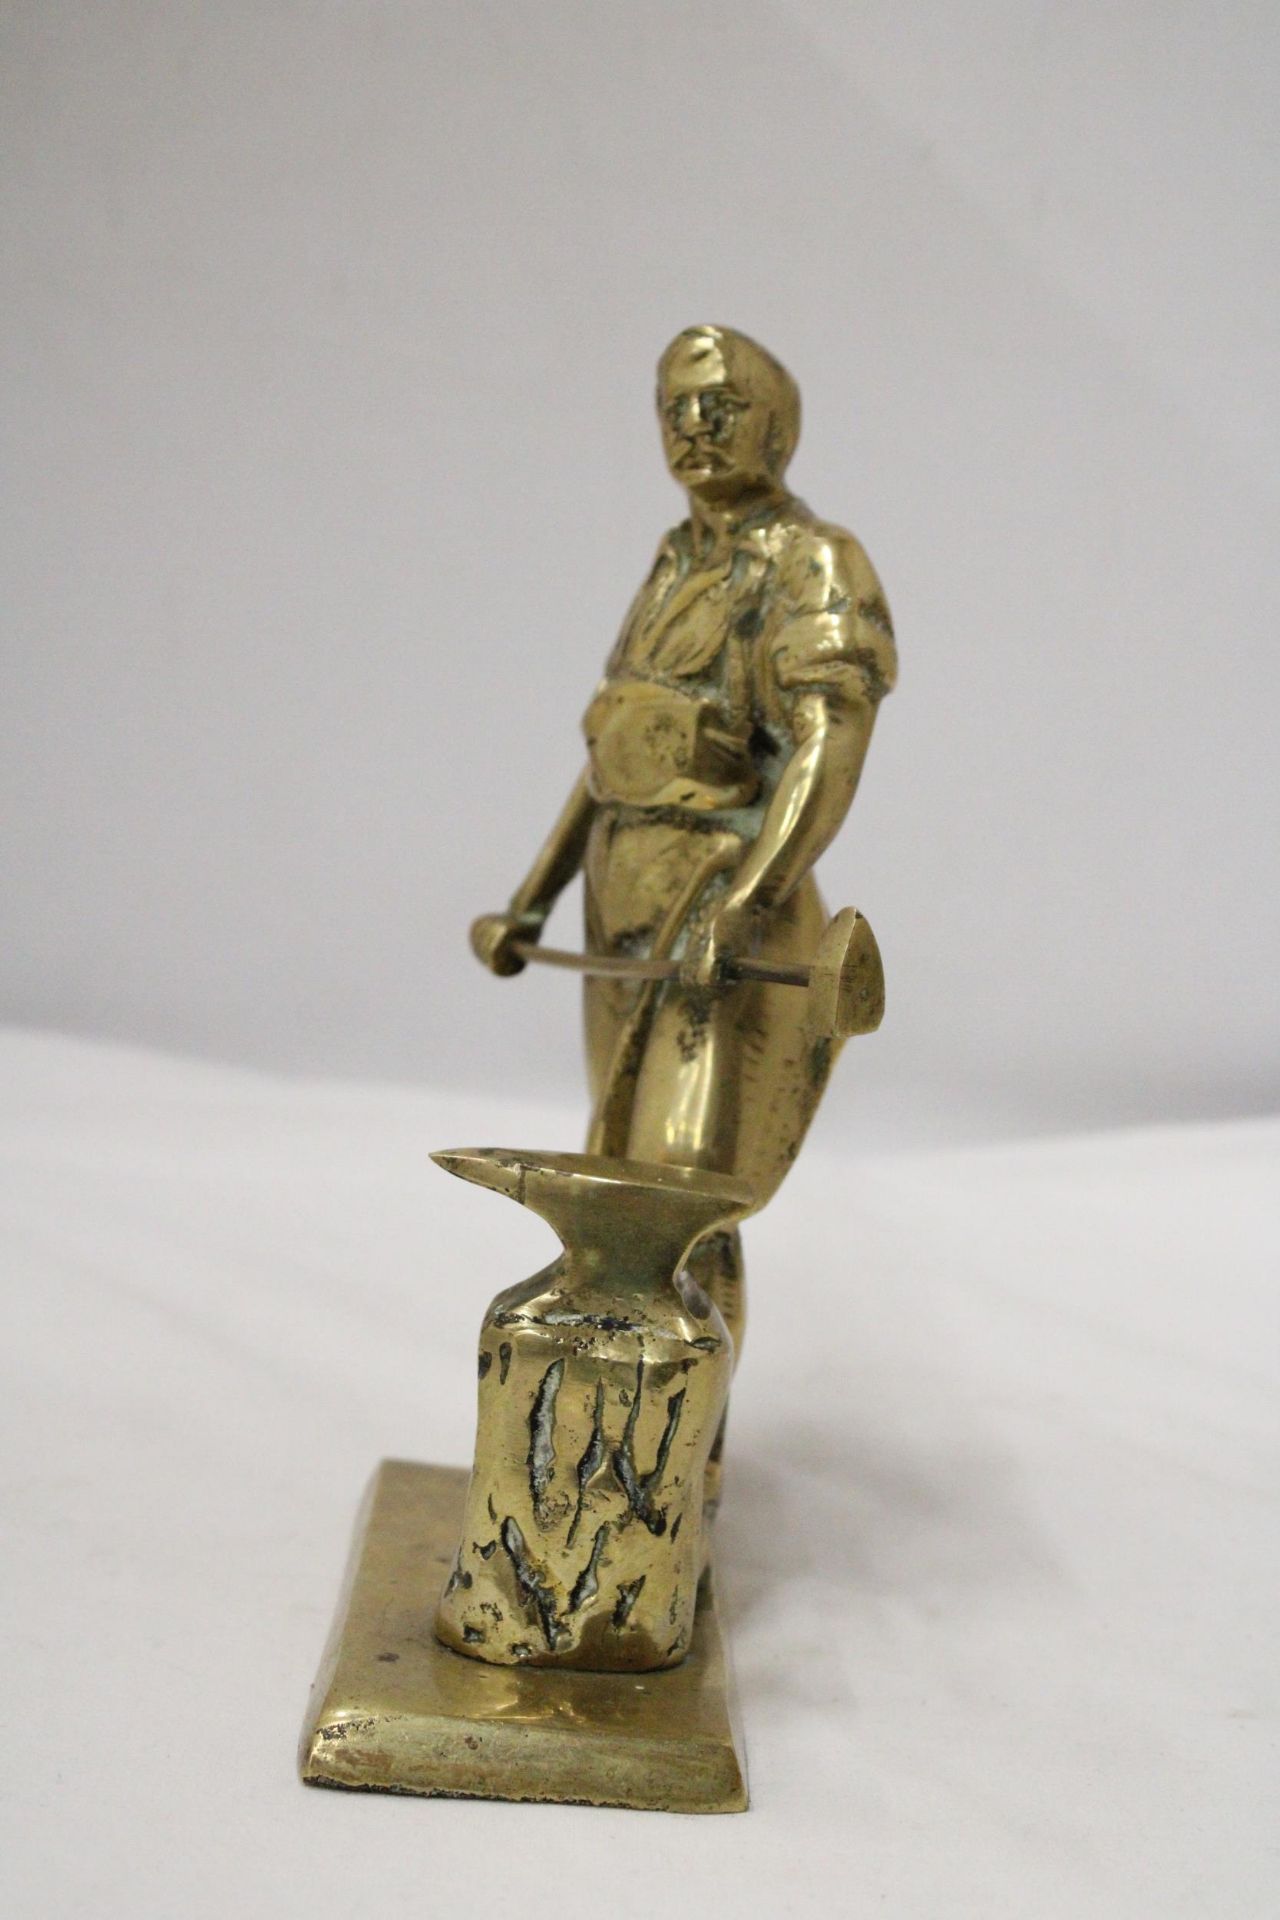 A HEAVY, SOLID, BRASS BLACKSMITH FIGURE, WEIGHS 4 KILOS, HEIGHT 20CM - Image 3 of 5